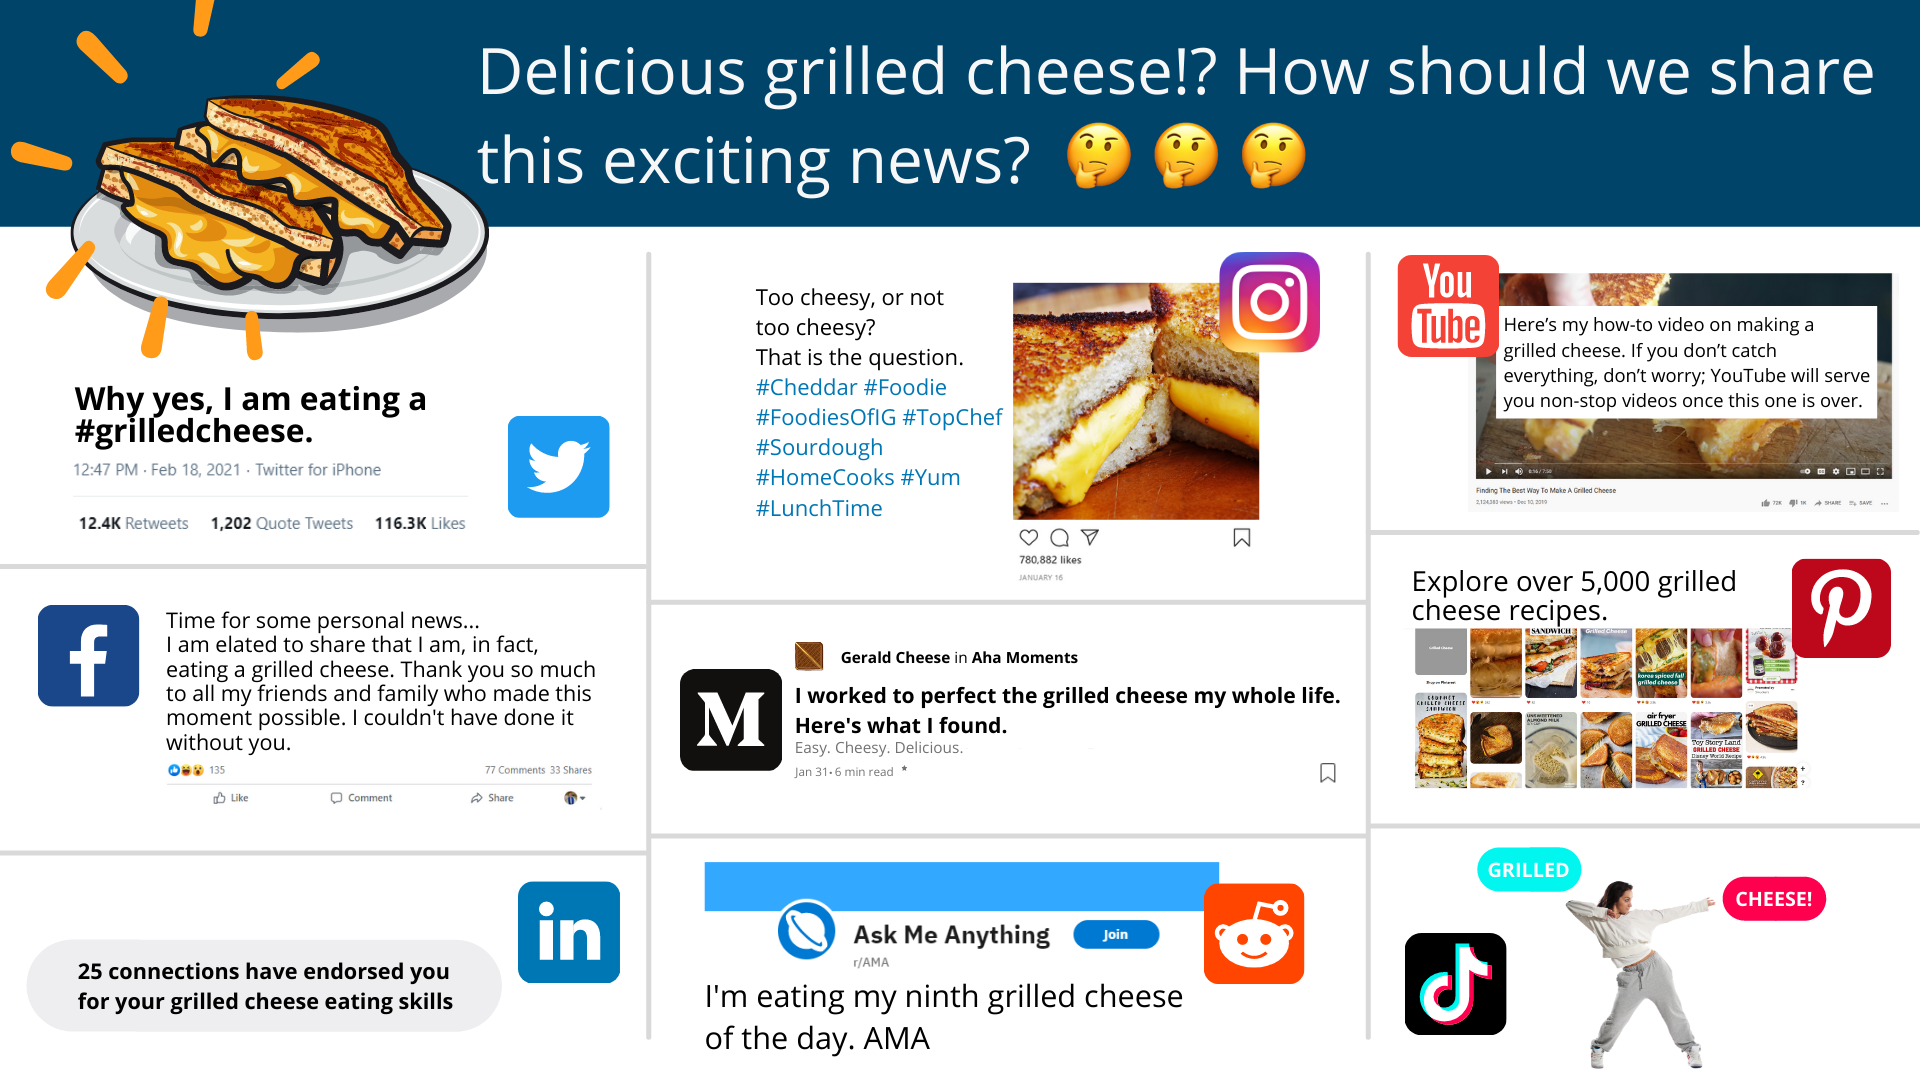 Delicious grilled cheese!? How should we share this exciting news?